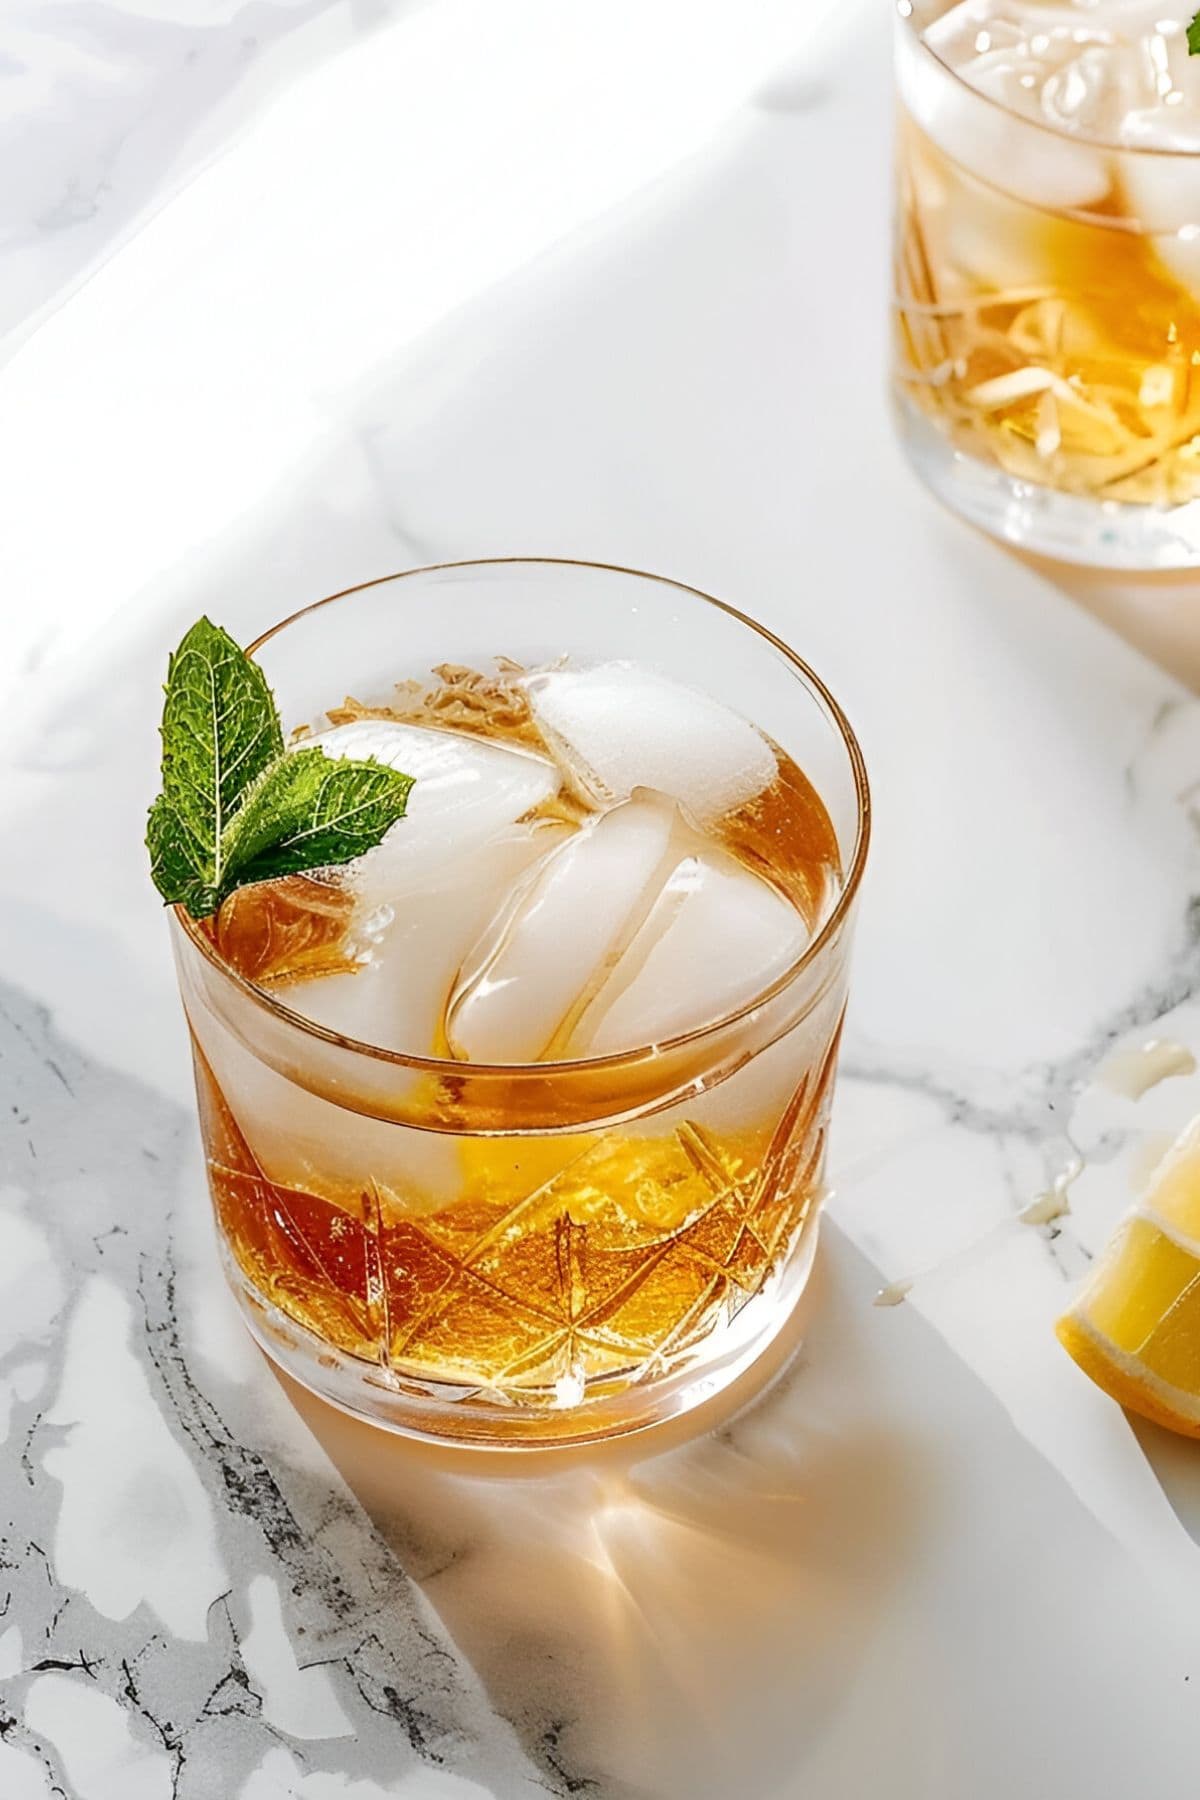 Bourbon Smash in Rocks Glass with Ice Cubes and a Spring of Mint